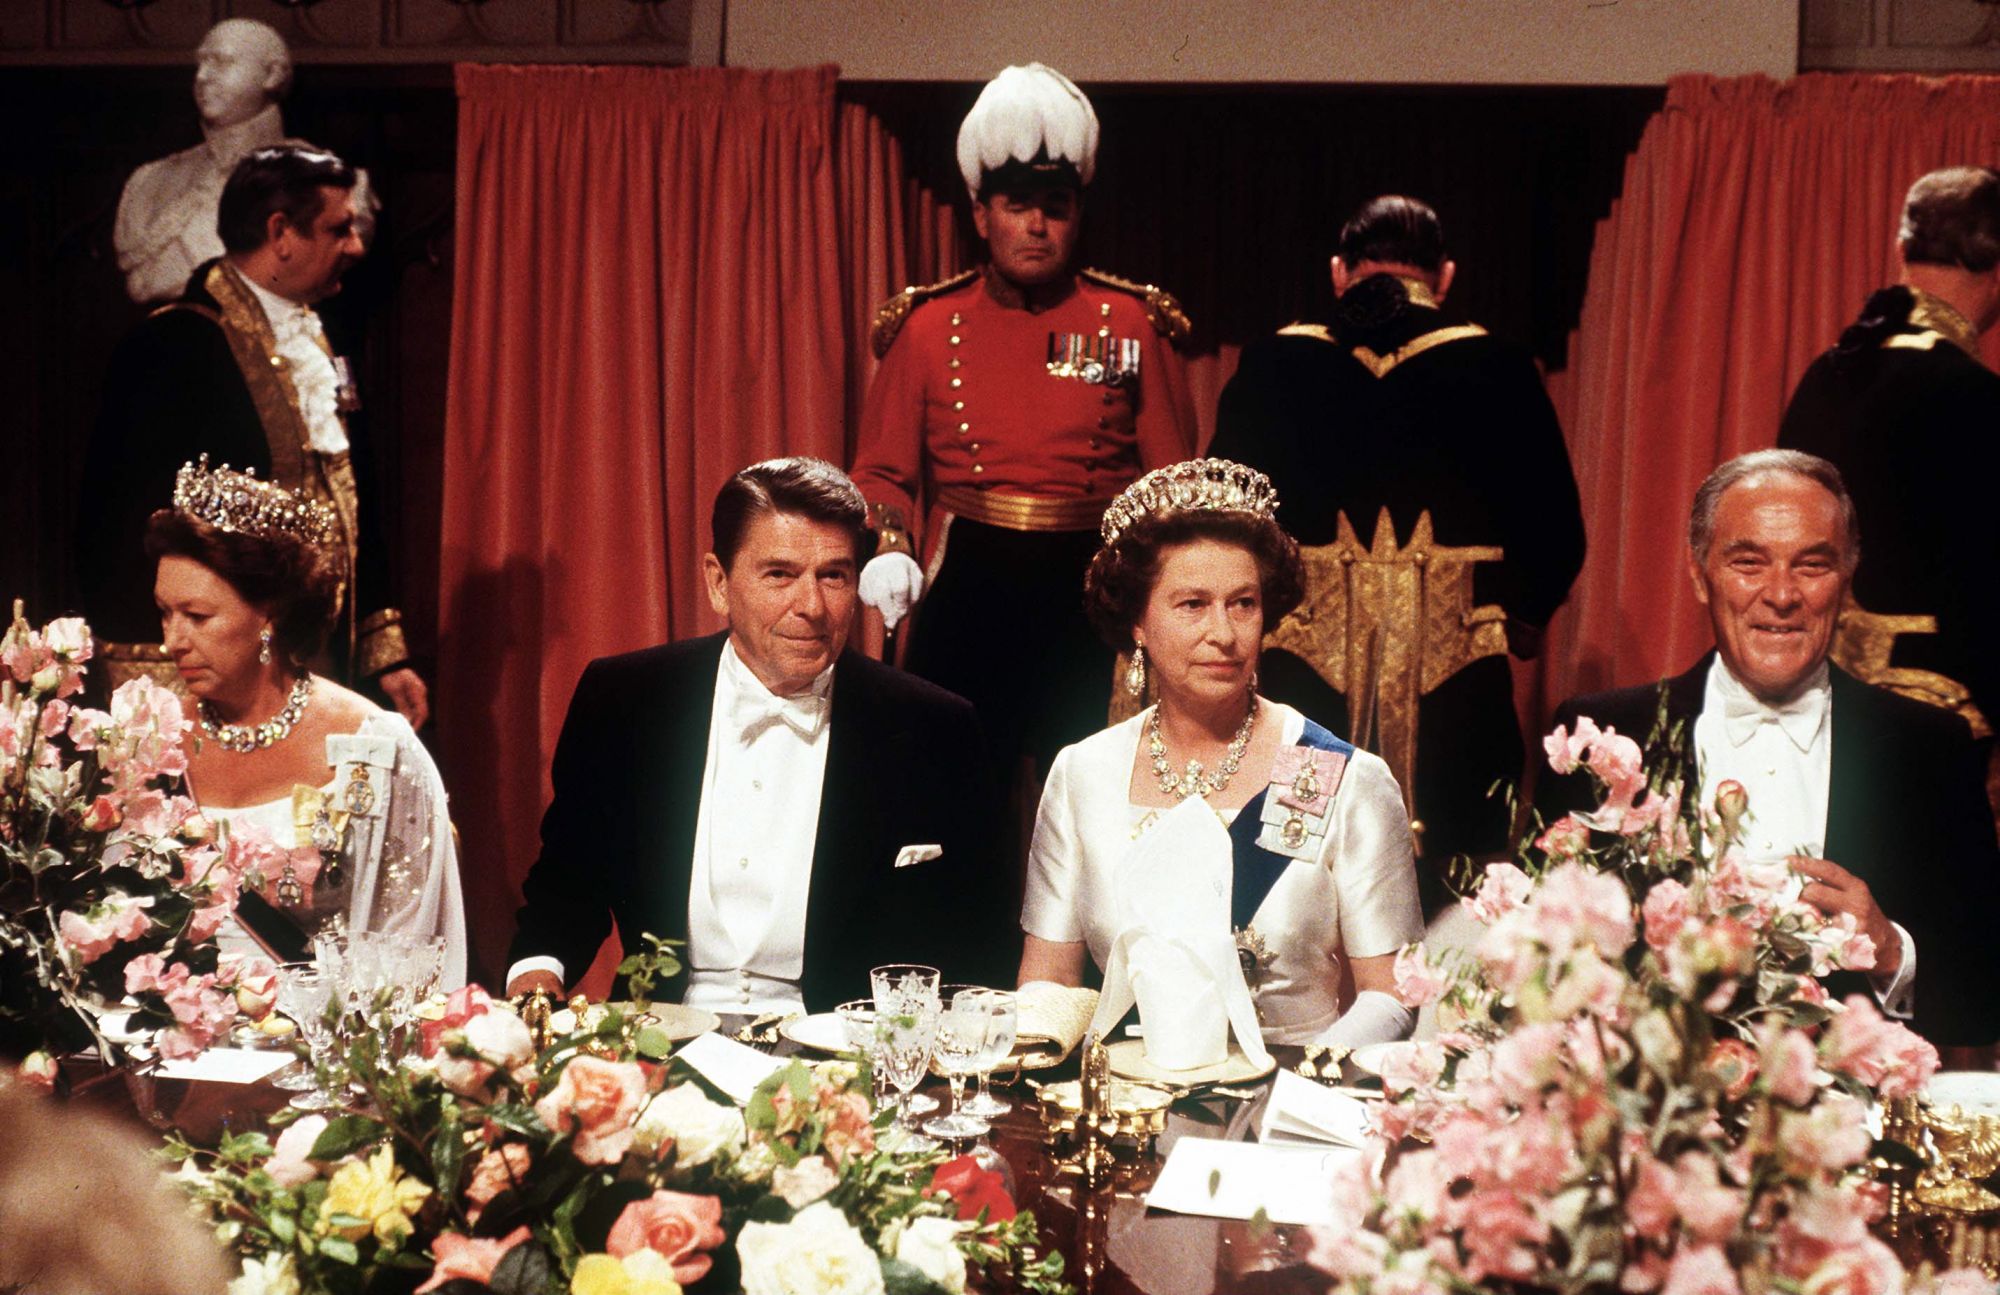 WINDSOR, UNITED KINGDOM - JUNE 07:  The Queen With President Reagan At A State Banquet At Windsor Castle.  (Photo by Tim Graham Photo Library via Getty Images)